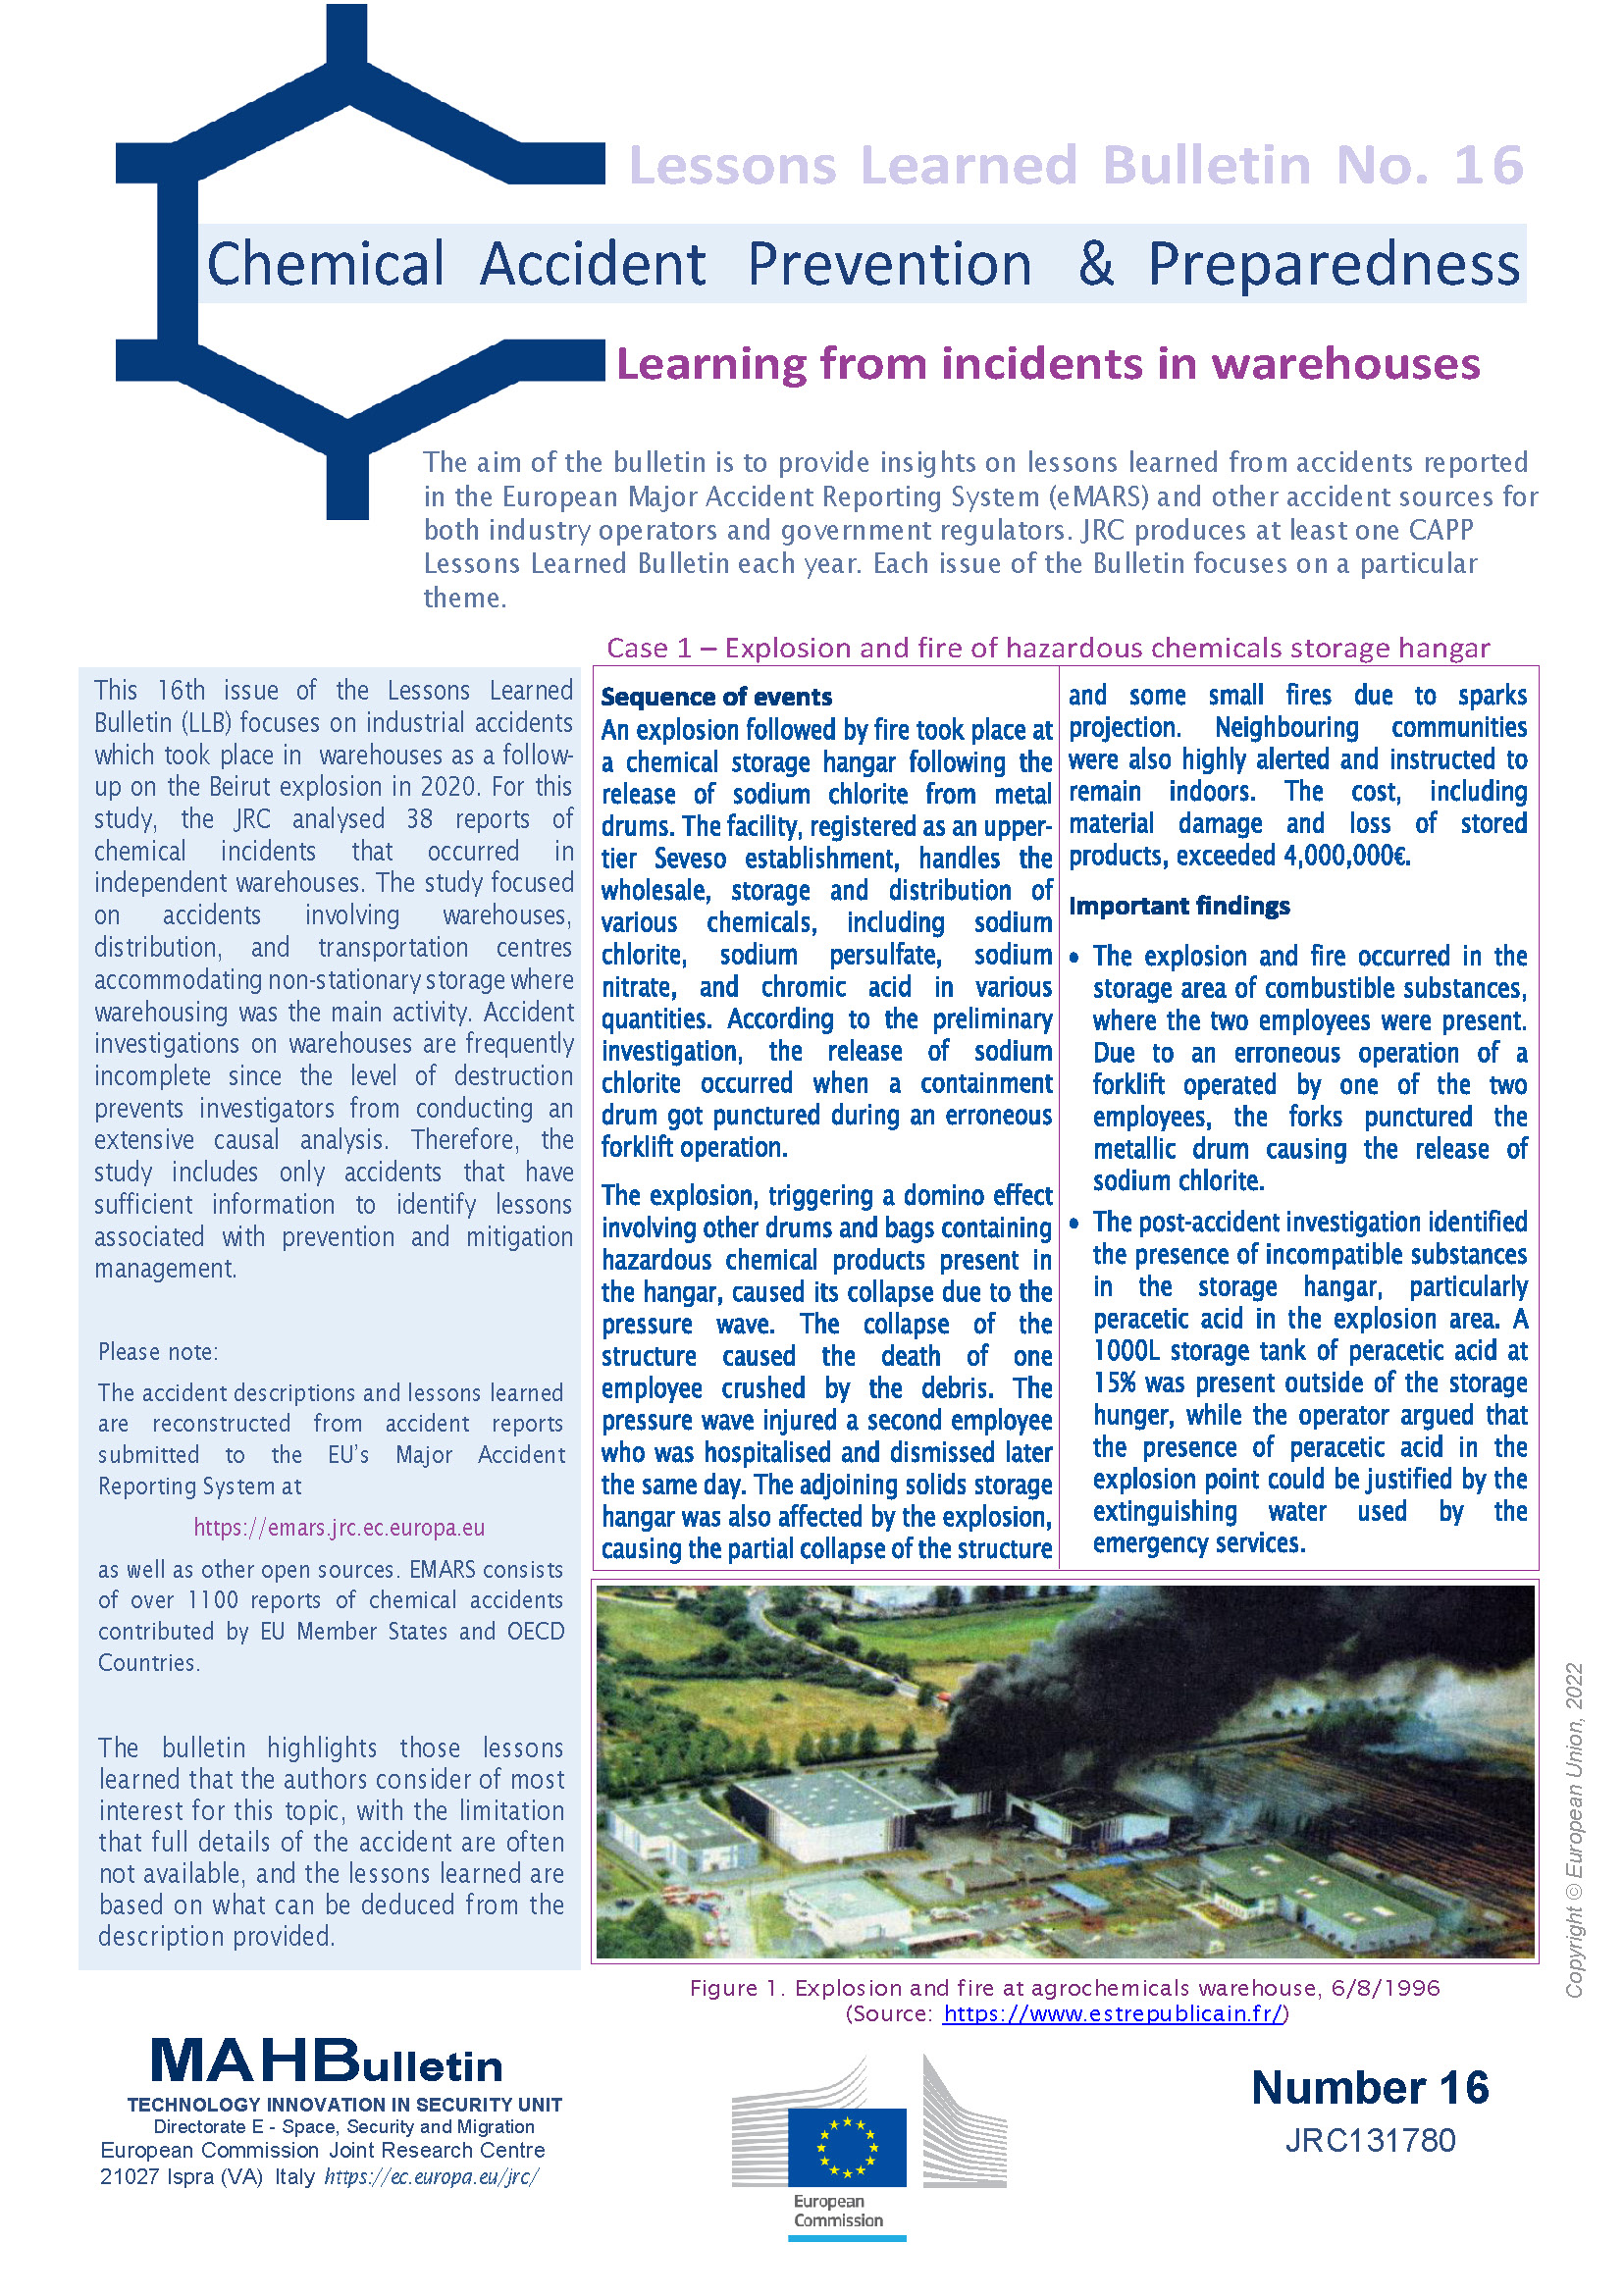 IChemE: Learning lessons from major incidents – improving process